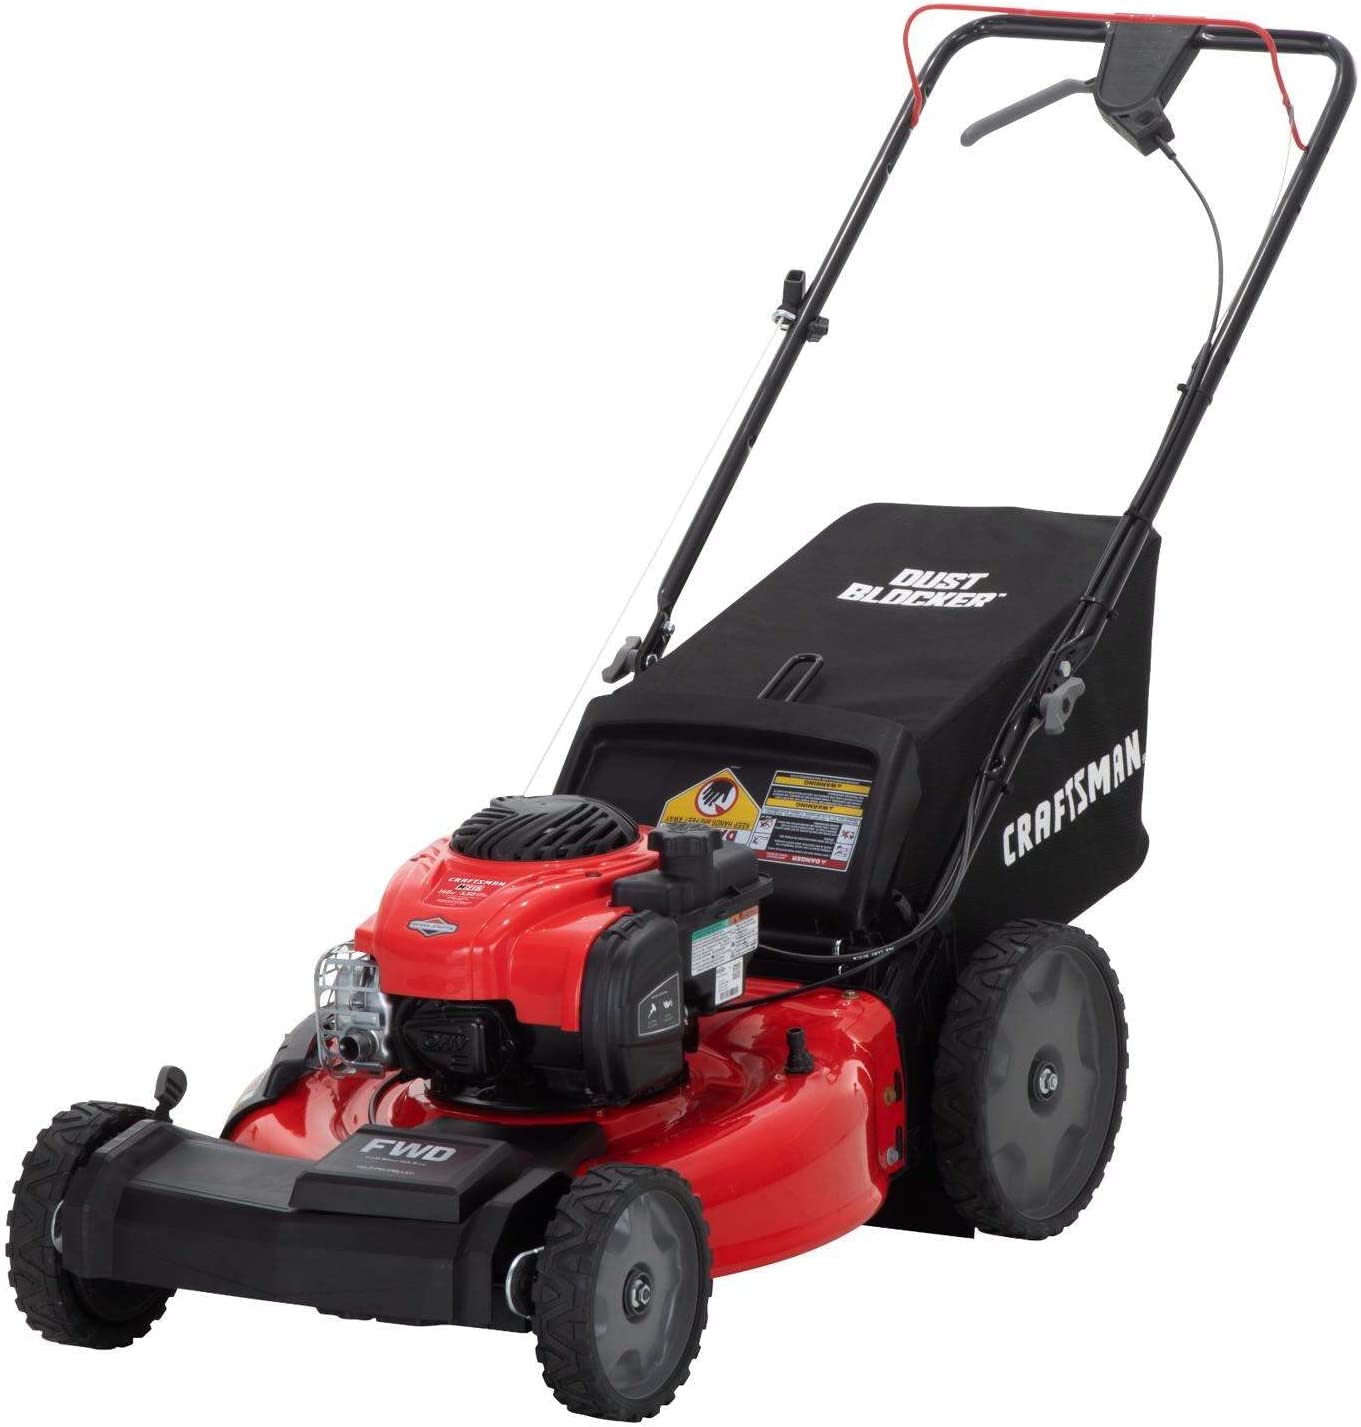 Craftsman M215 Dual Lever Self-Propelled Lawn Mower, 21-Inch